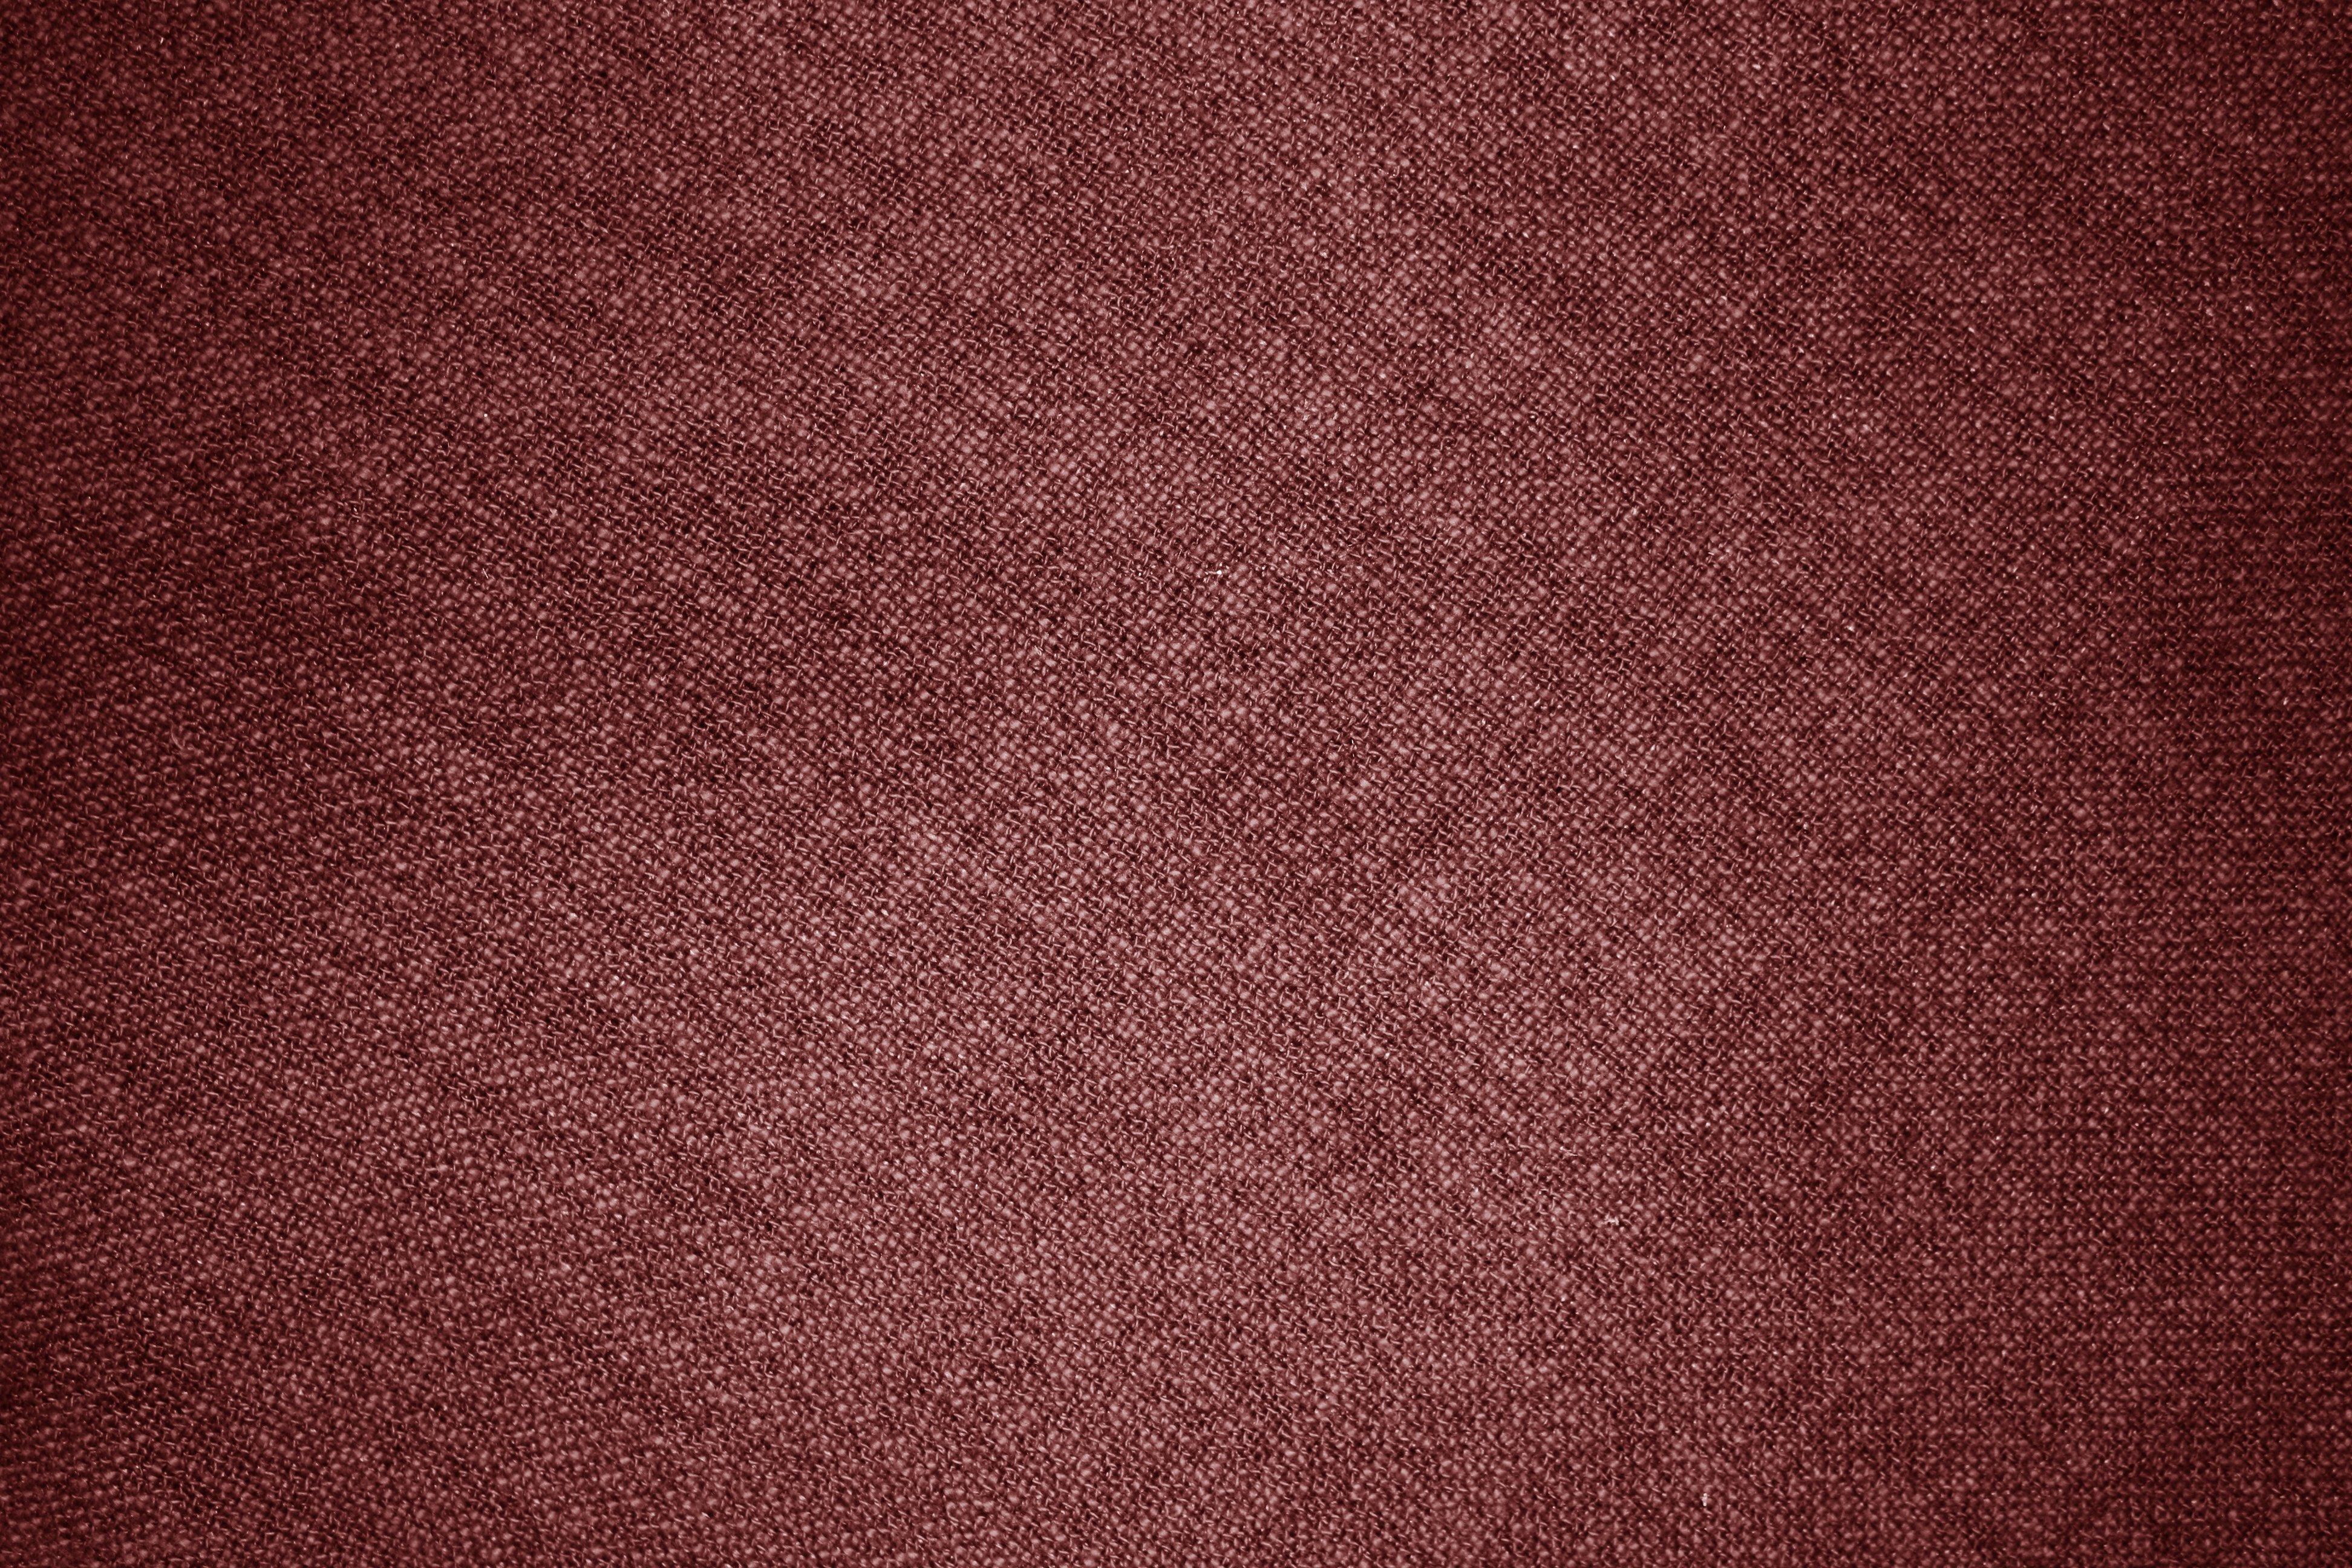 Maroon Fabric Texture Picture. Free Photograph. Photo Public Domain